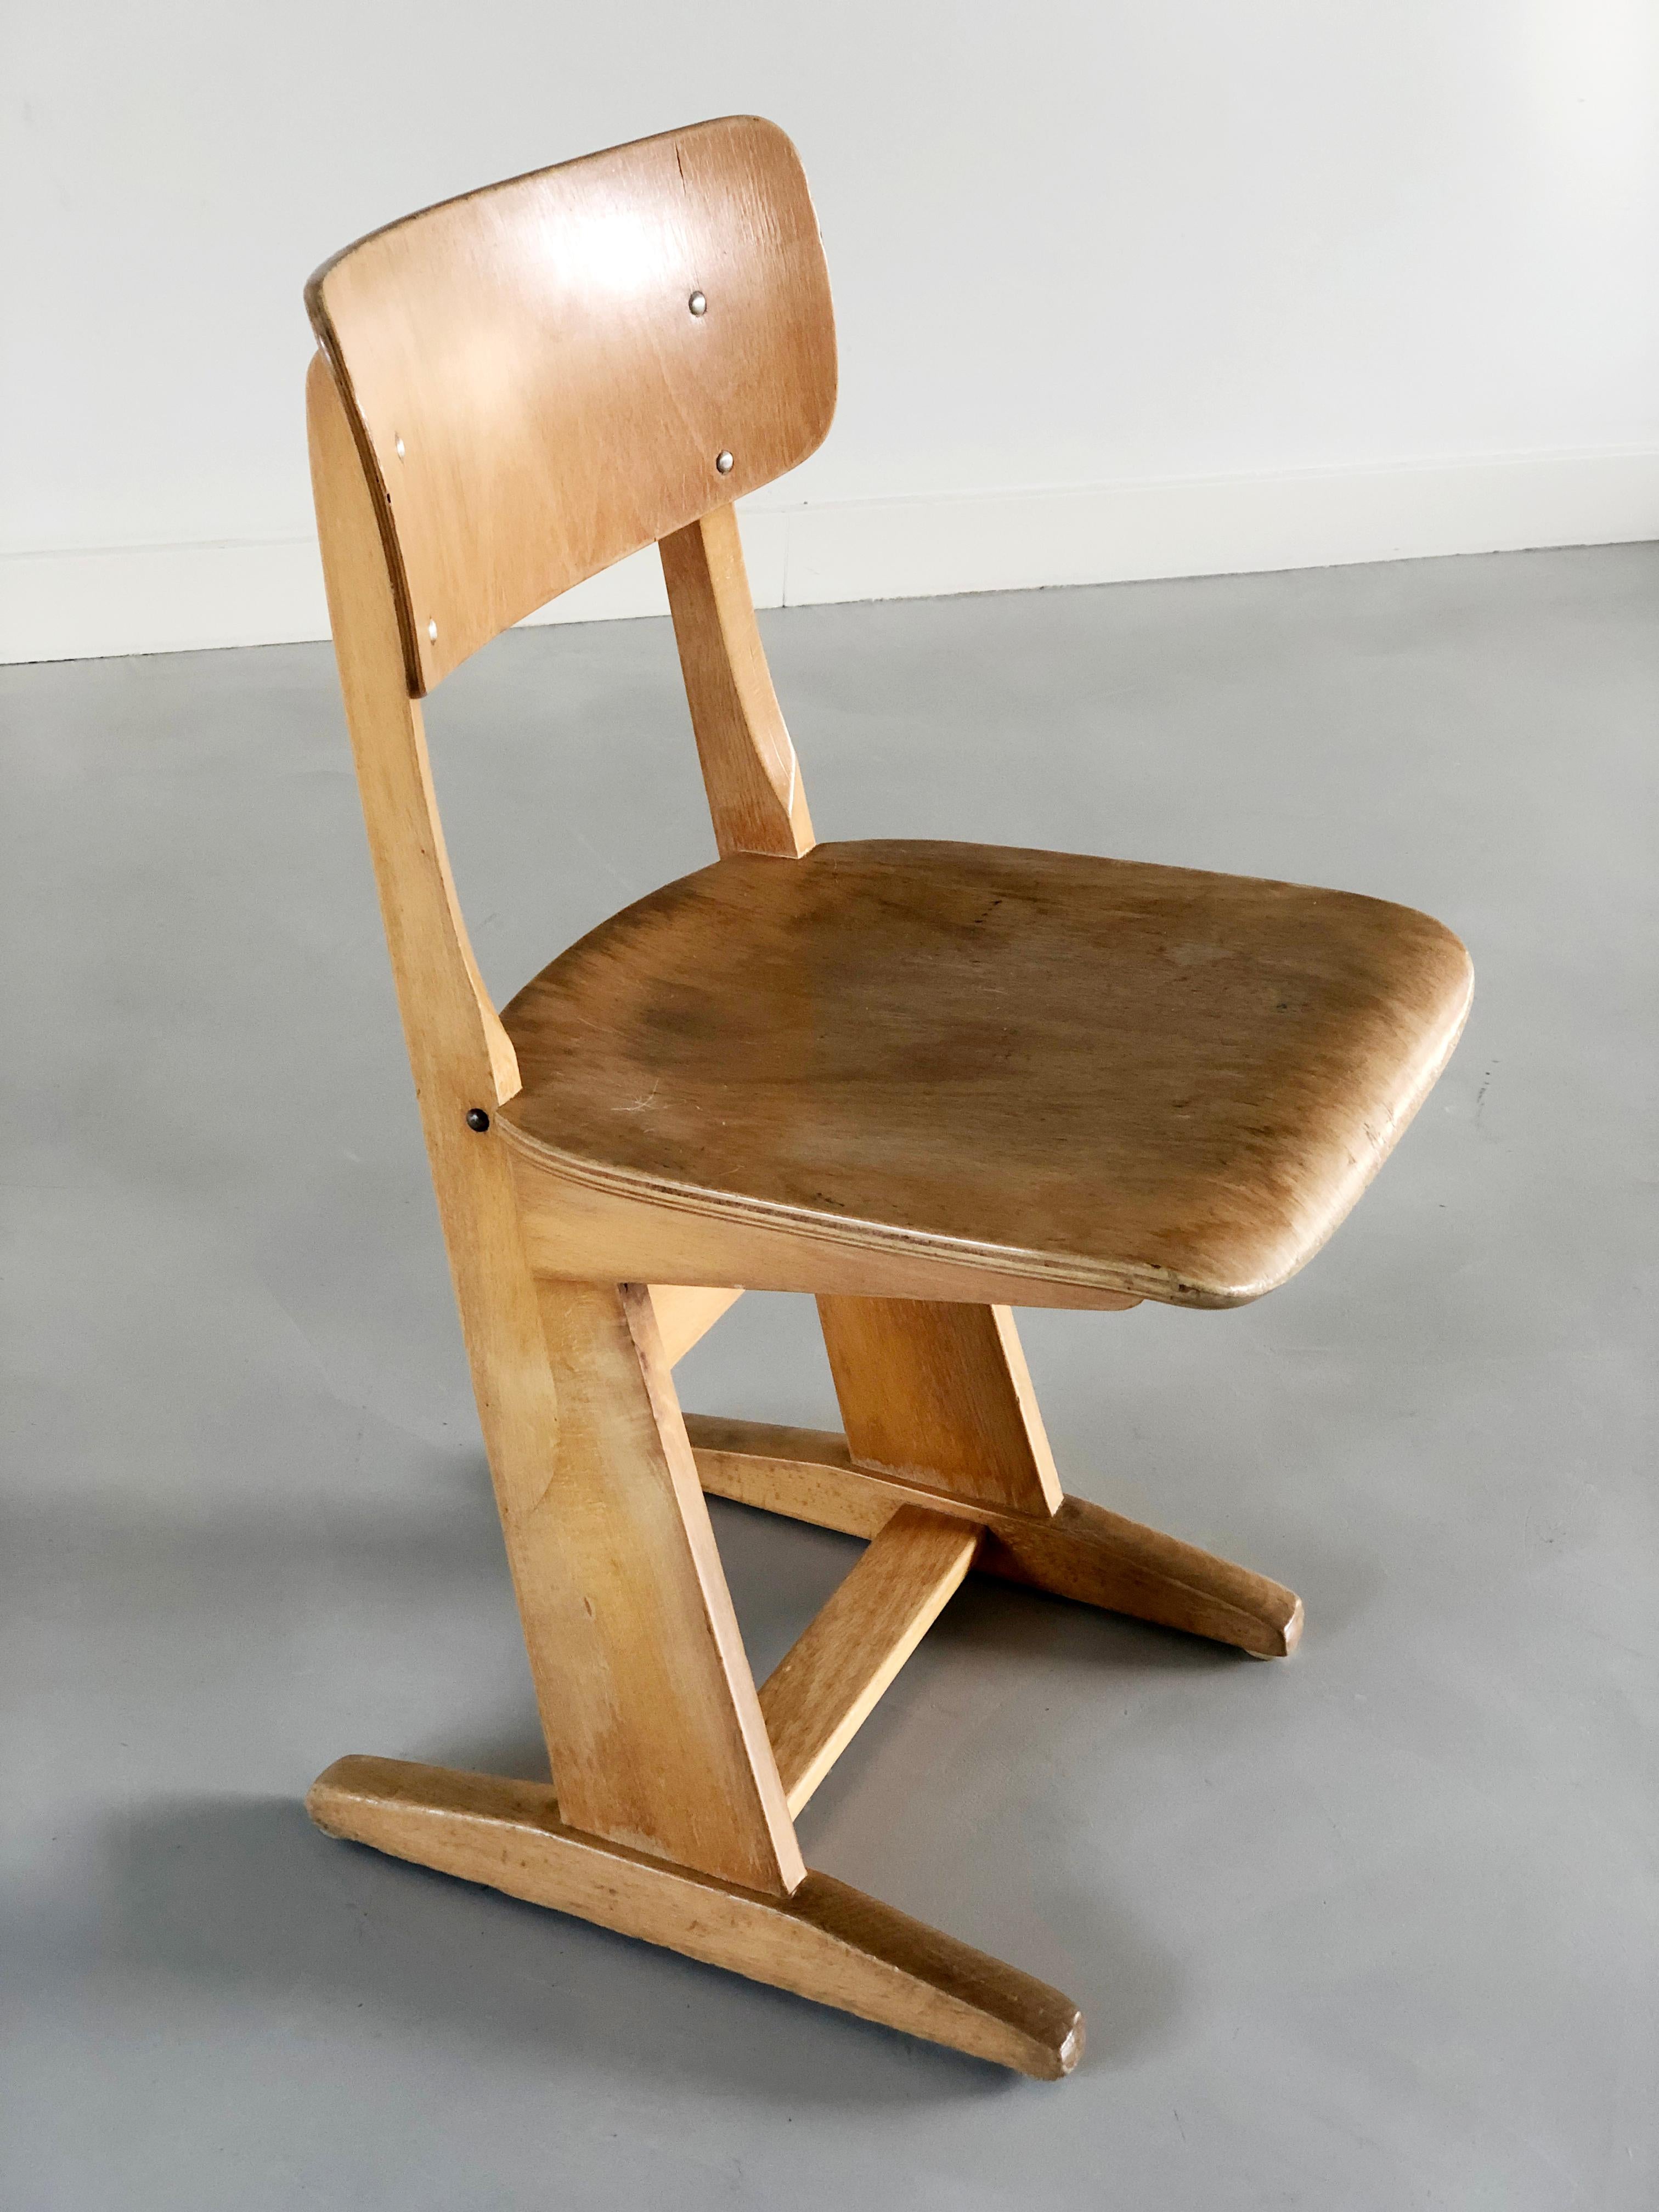 Laminated Children's School Chair by Karl Nothhelfer for Casala 1969 For Sale